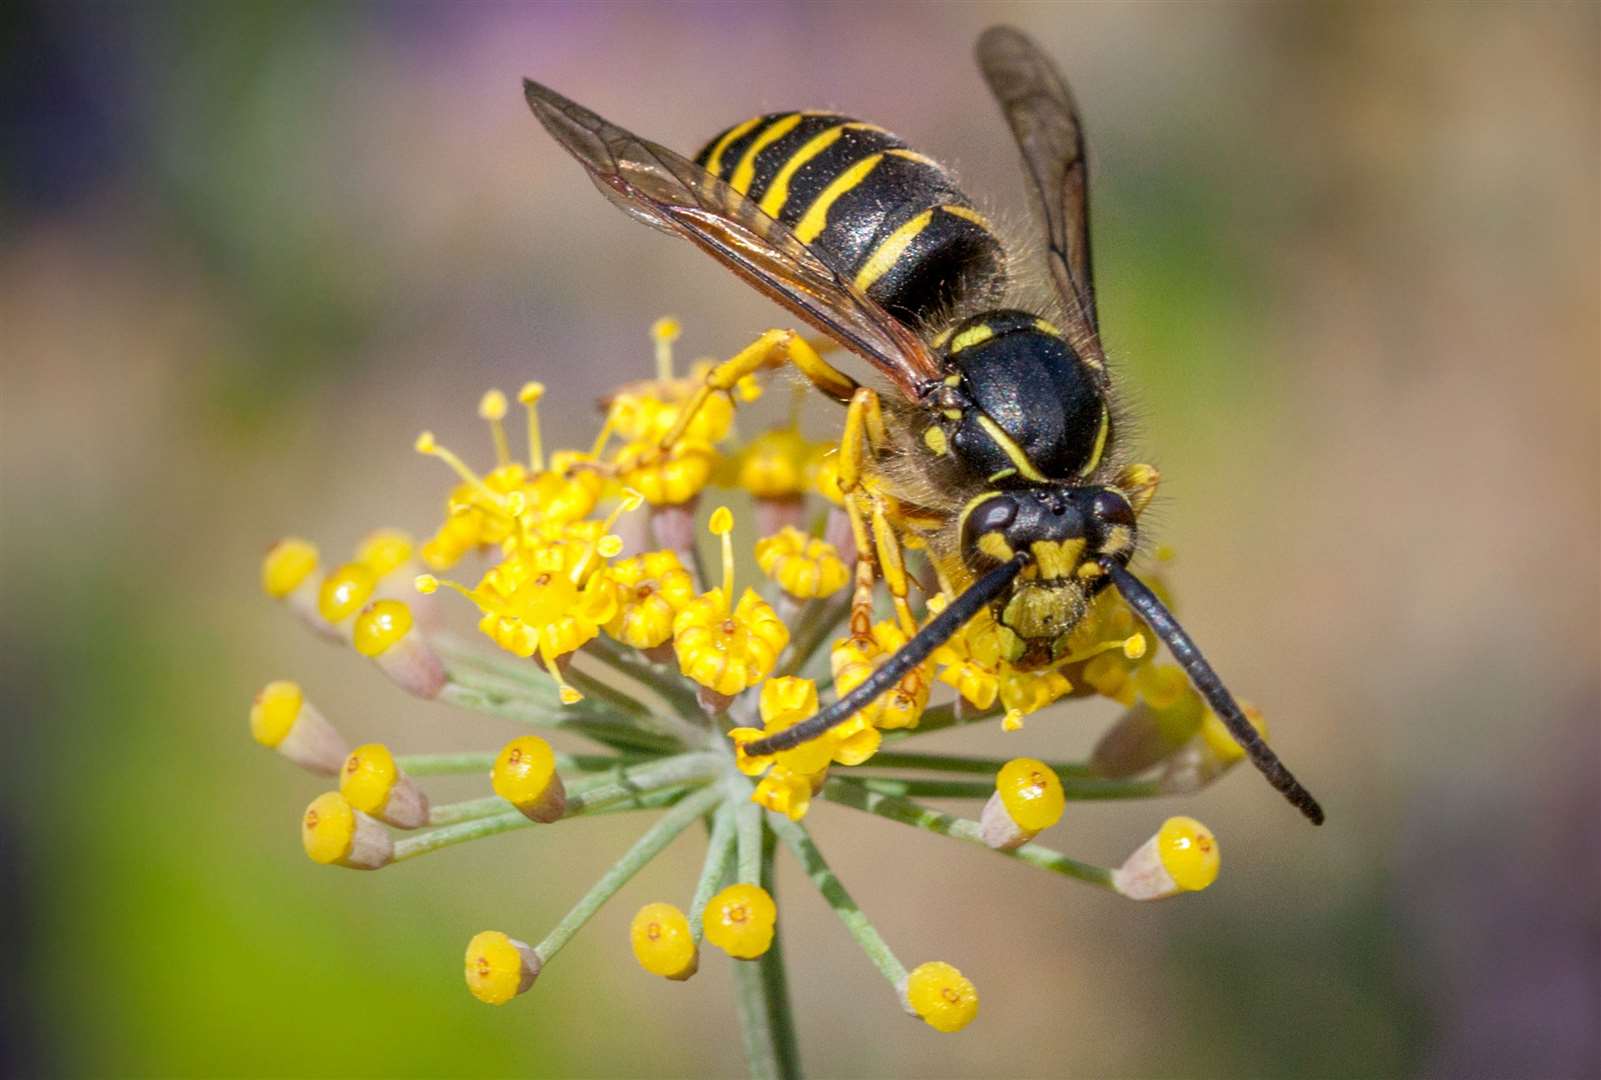 A wasp or hornet sting can be painful. Image: Stock photo.